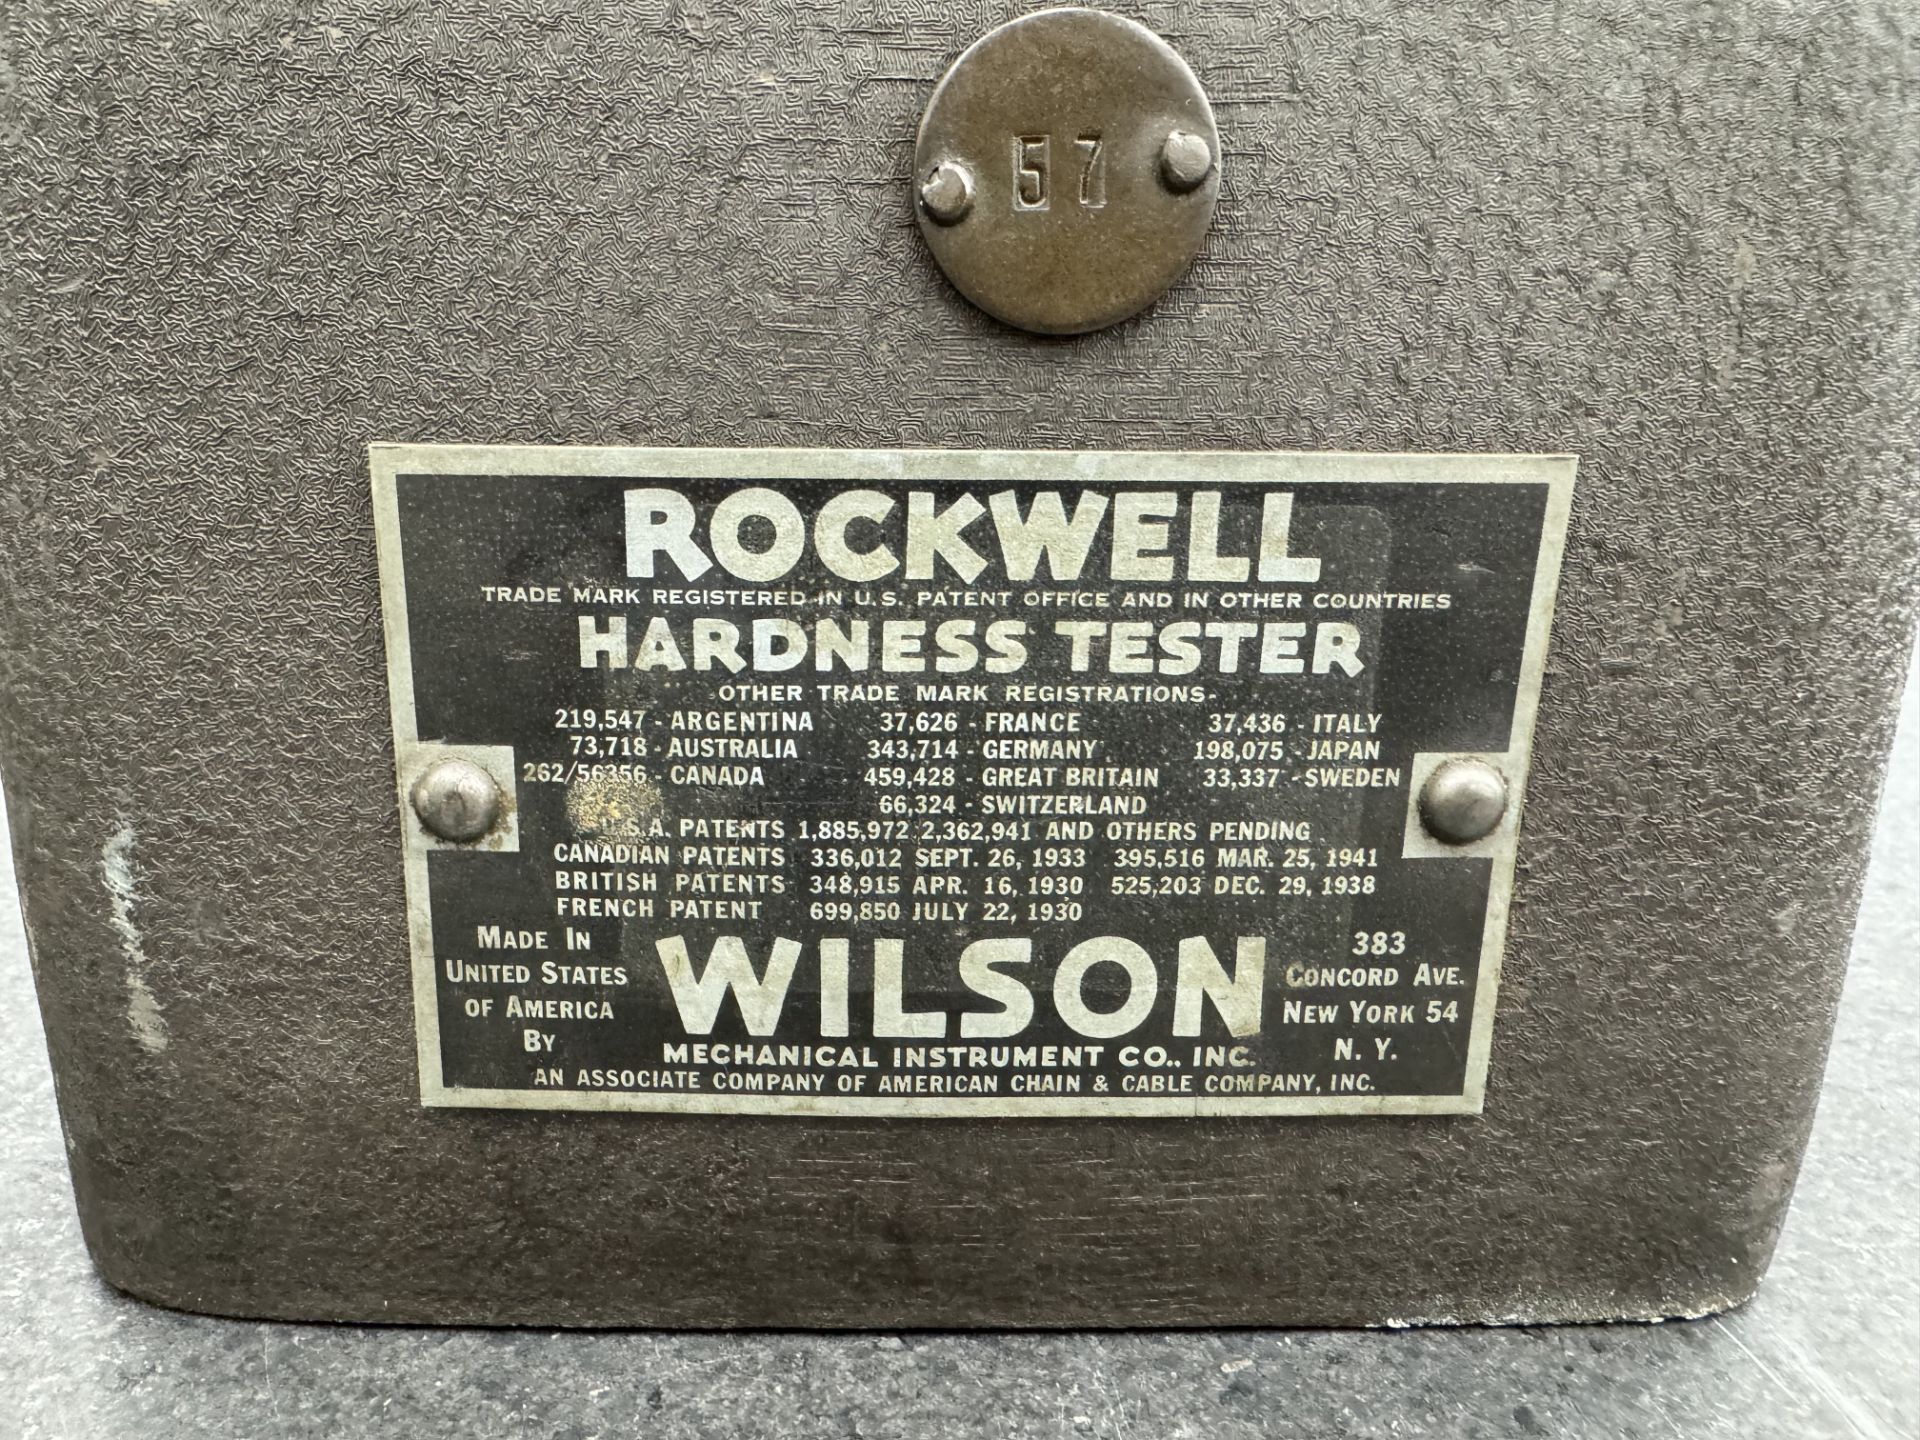 Wilson Mod. 4JR Rockwell Hardness Tester w/ Weights - Image 5 of 5